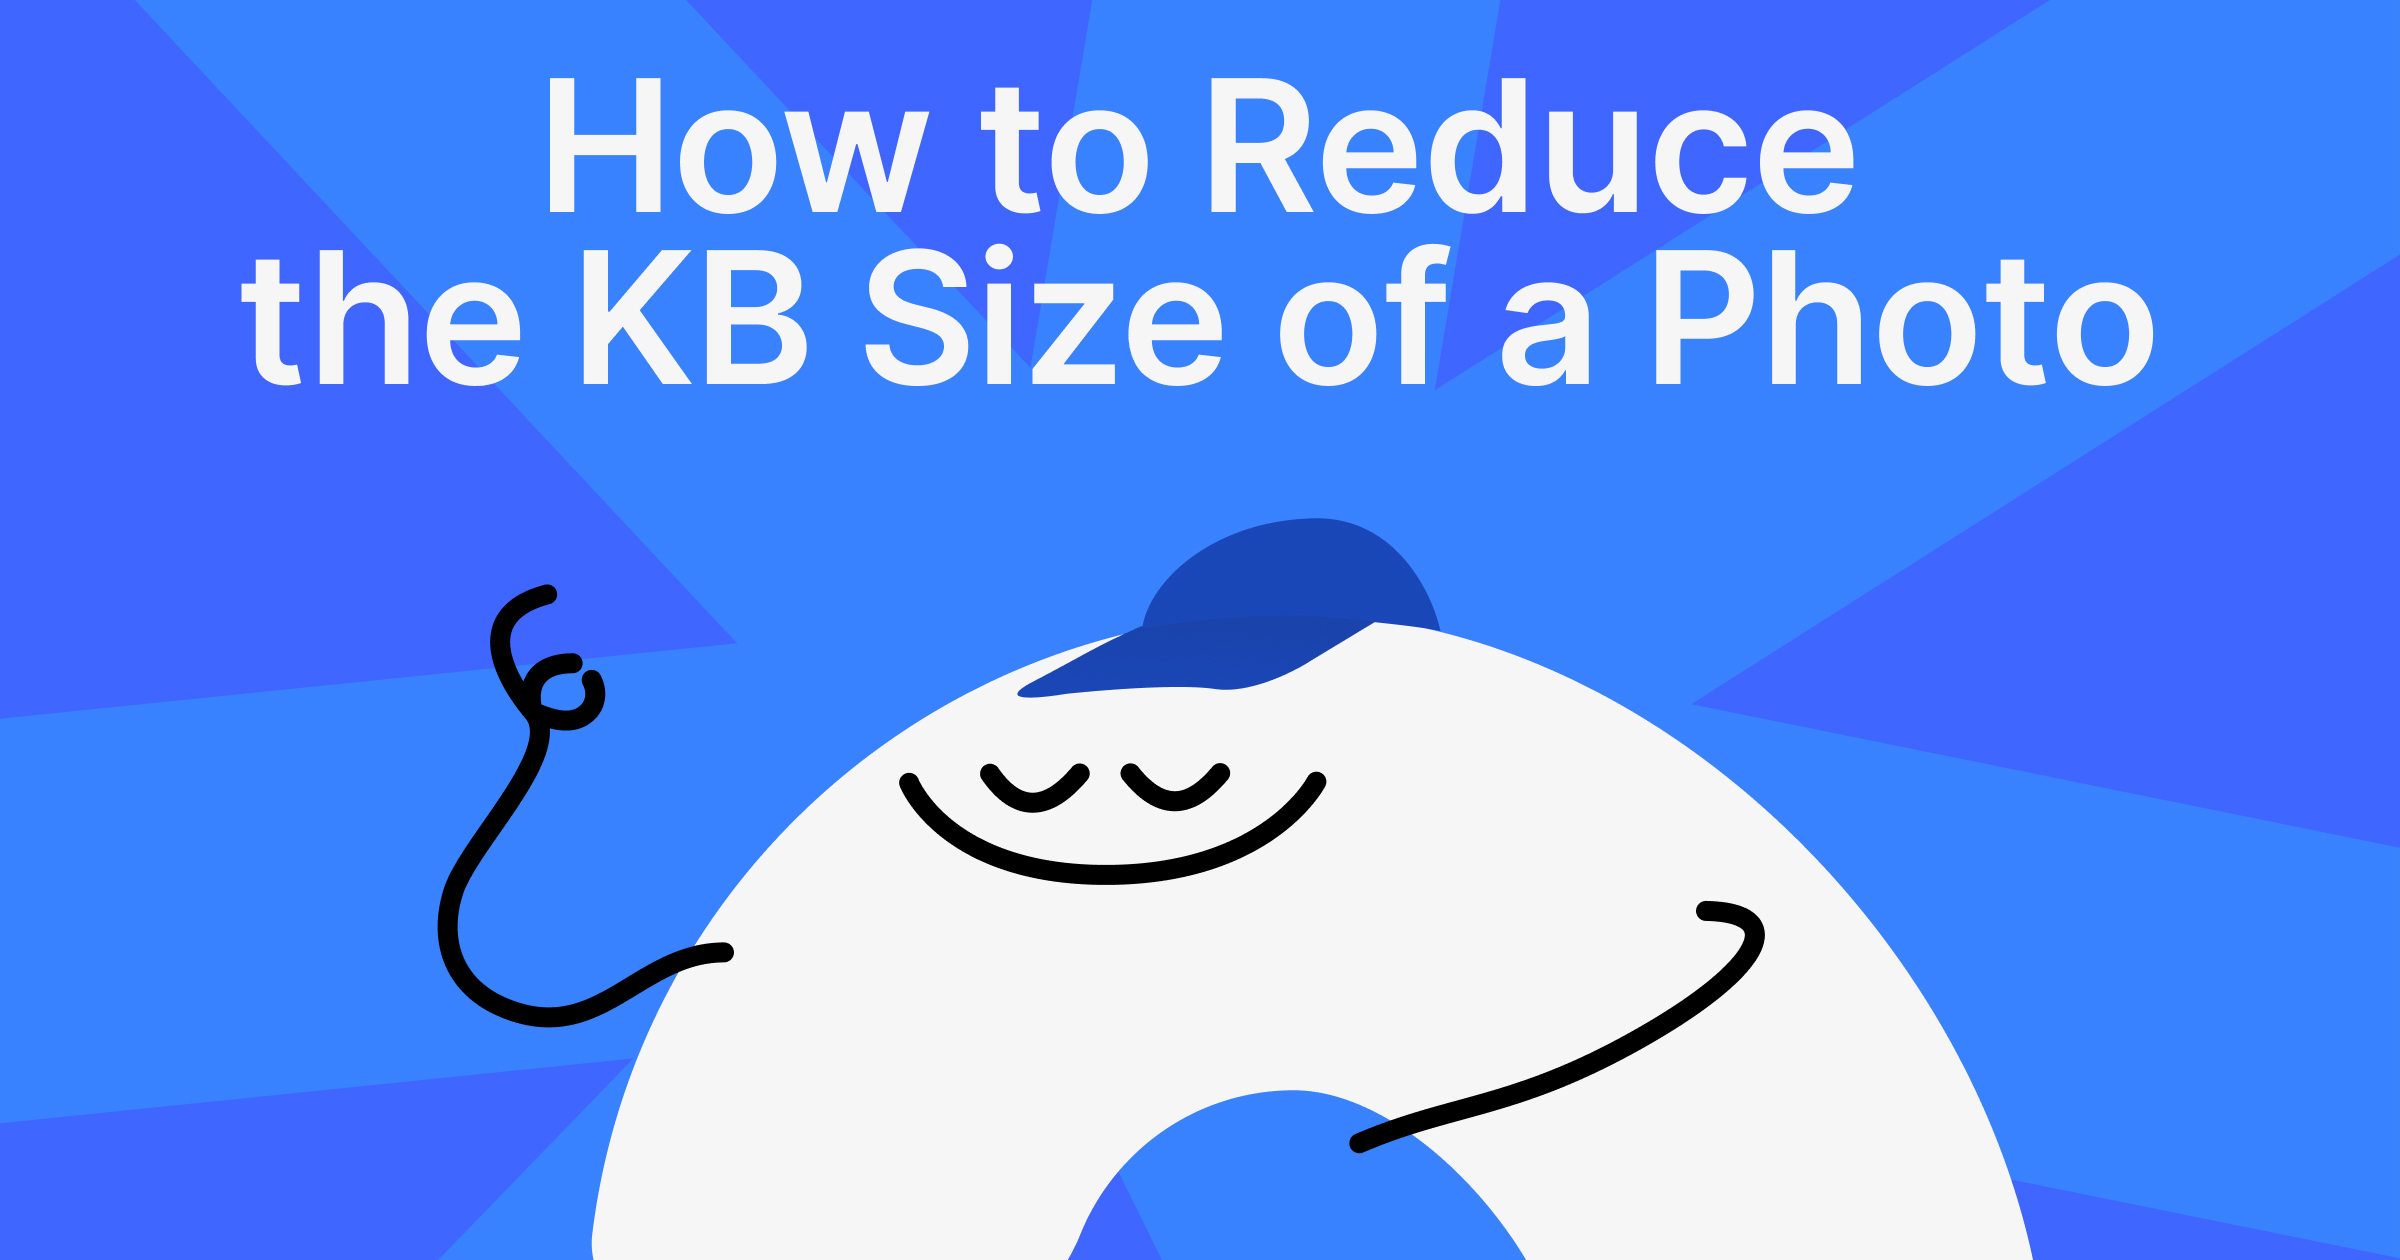 How Do I Reduce the KB Size of a Photo: 4 Ways